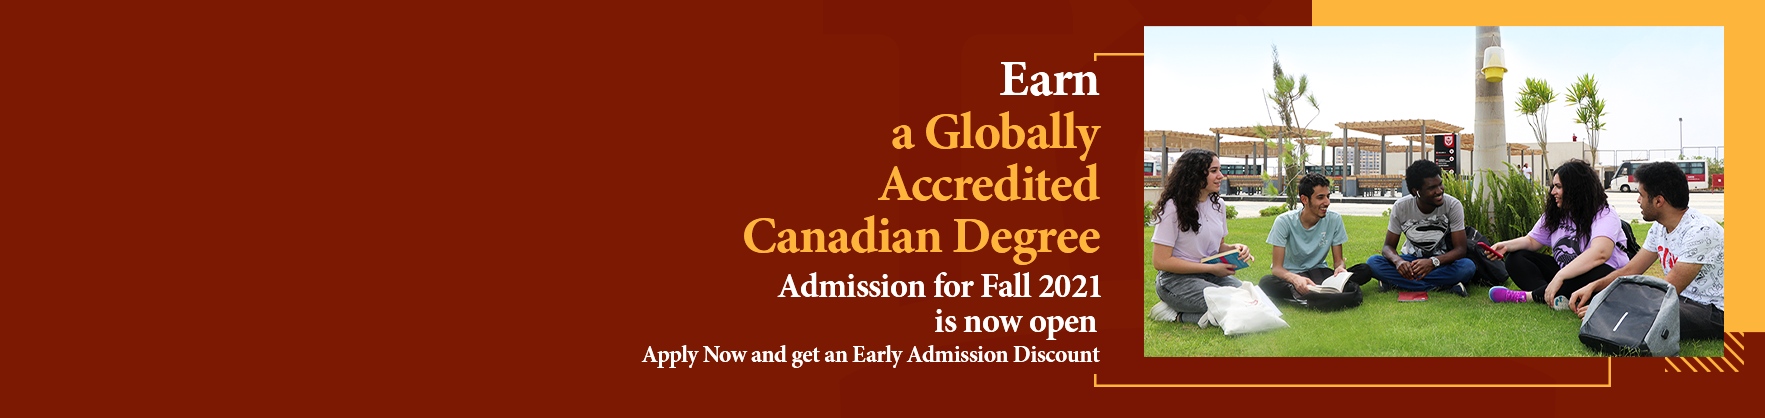 Fall 2021 Admission is Now Open